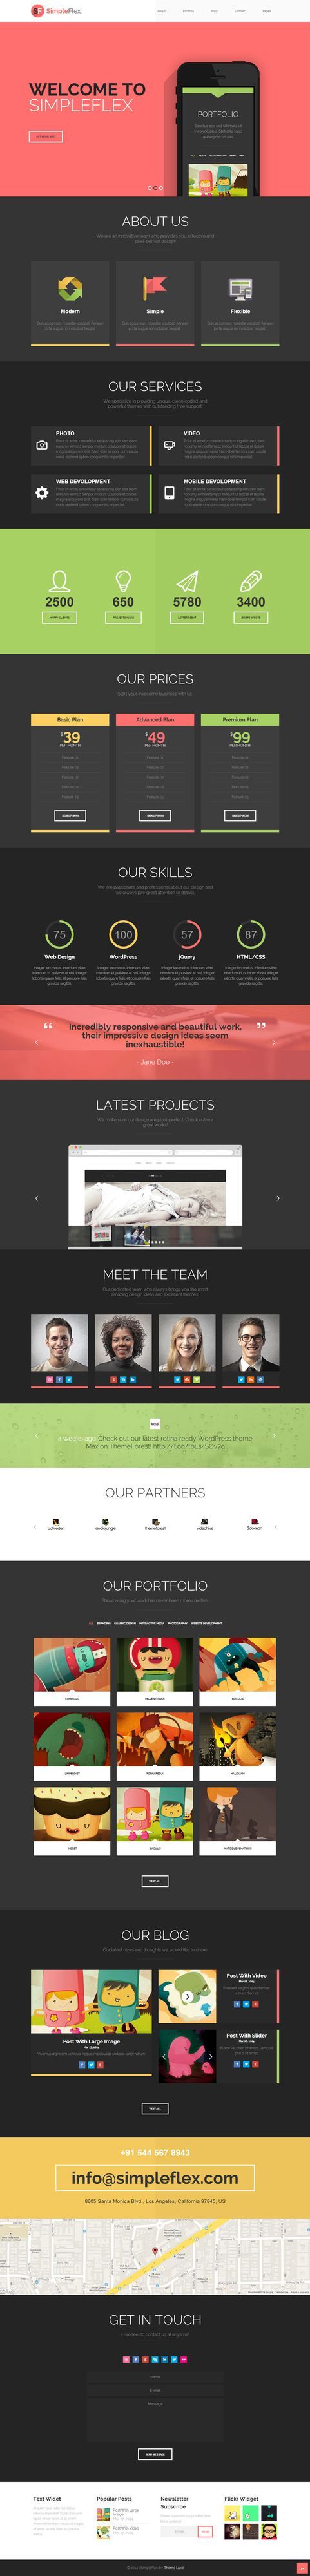 Flat One Page WordPress Theme. Beautiful colors. Great use of design principles....